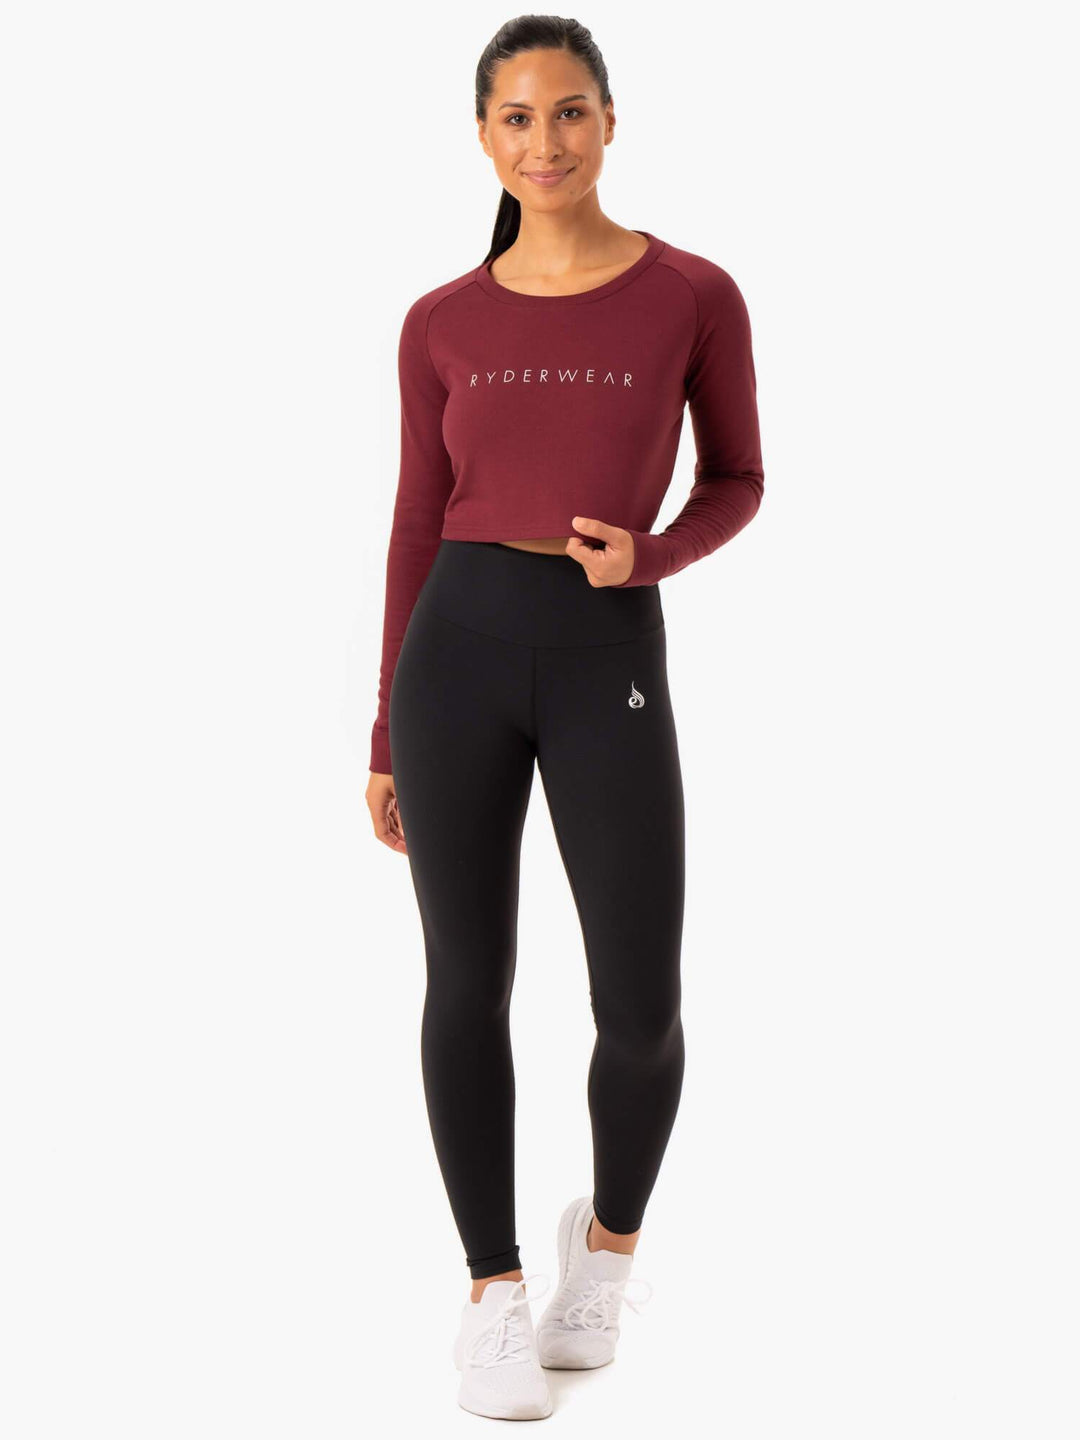 Staples Cropped Sweater - Burgundy Clothing Ryderwear 